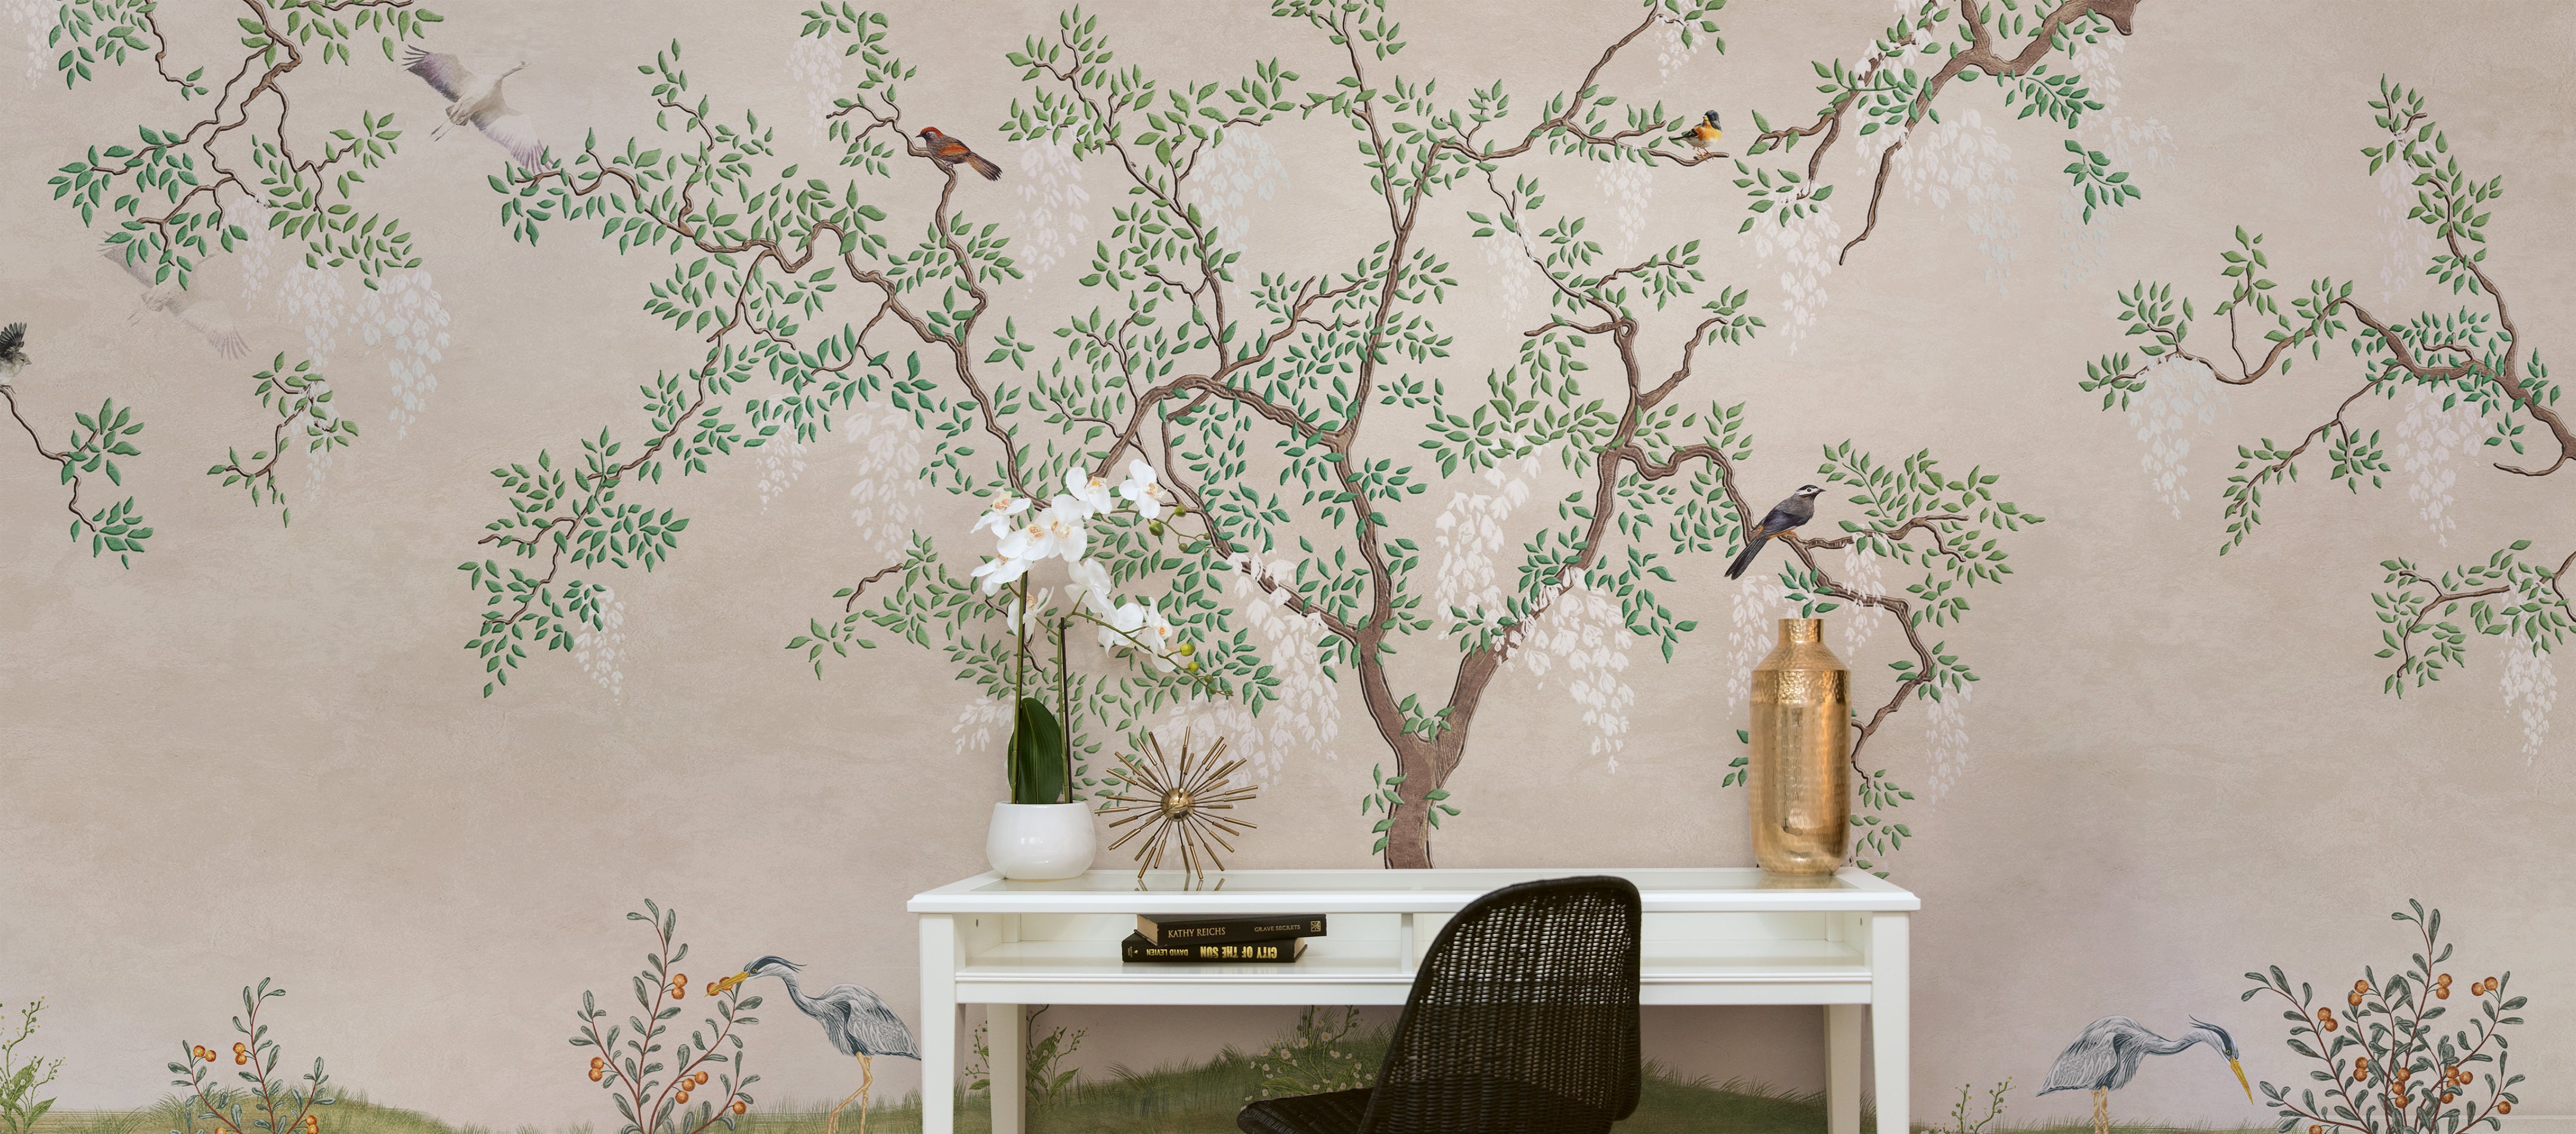 A panoramic view of the Chinoiserie - Wallpaper Mural, depicting an expansive and beautifully detailed scene of a tree with lush green leaves and intricate branches. Various birds, including herons and small songbirds, animate the scene, adding a dynamic element to the serene backdrop.